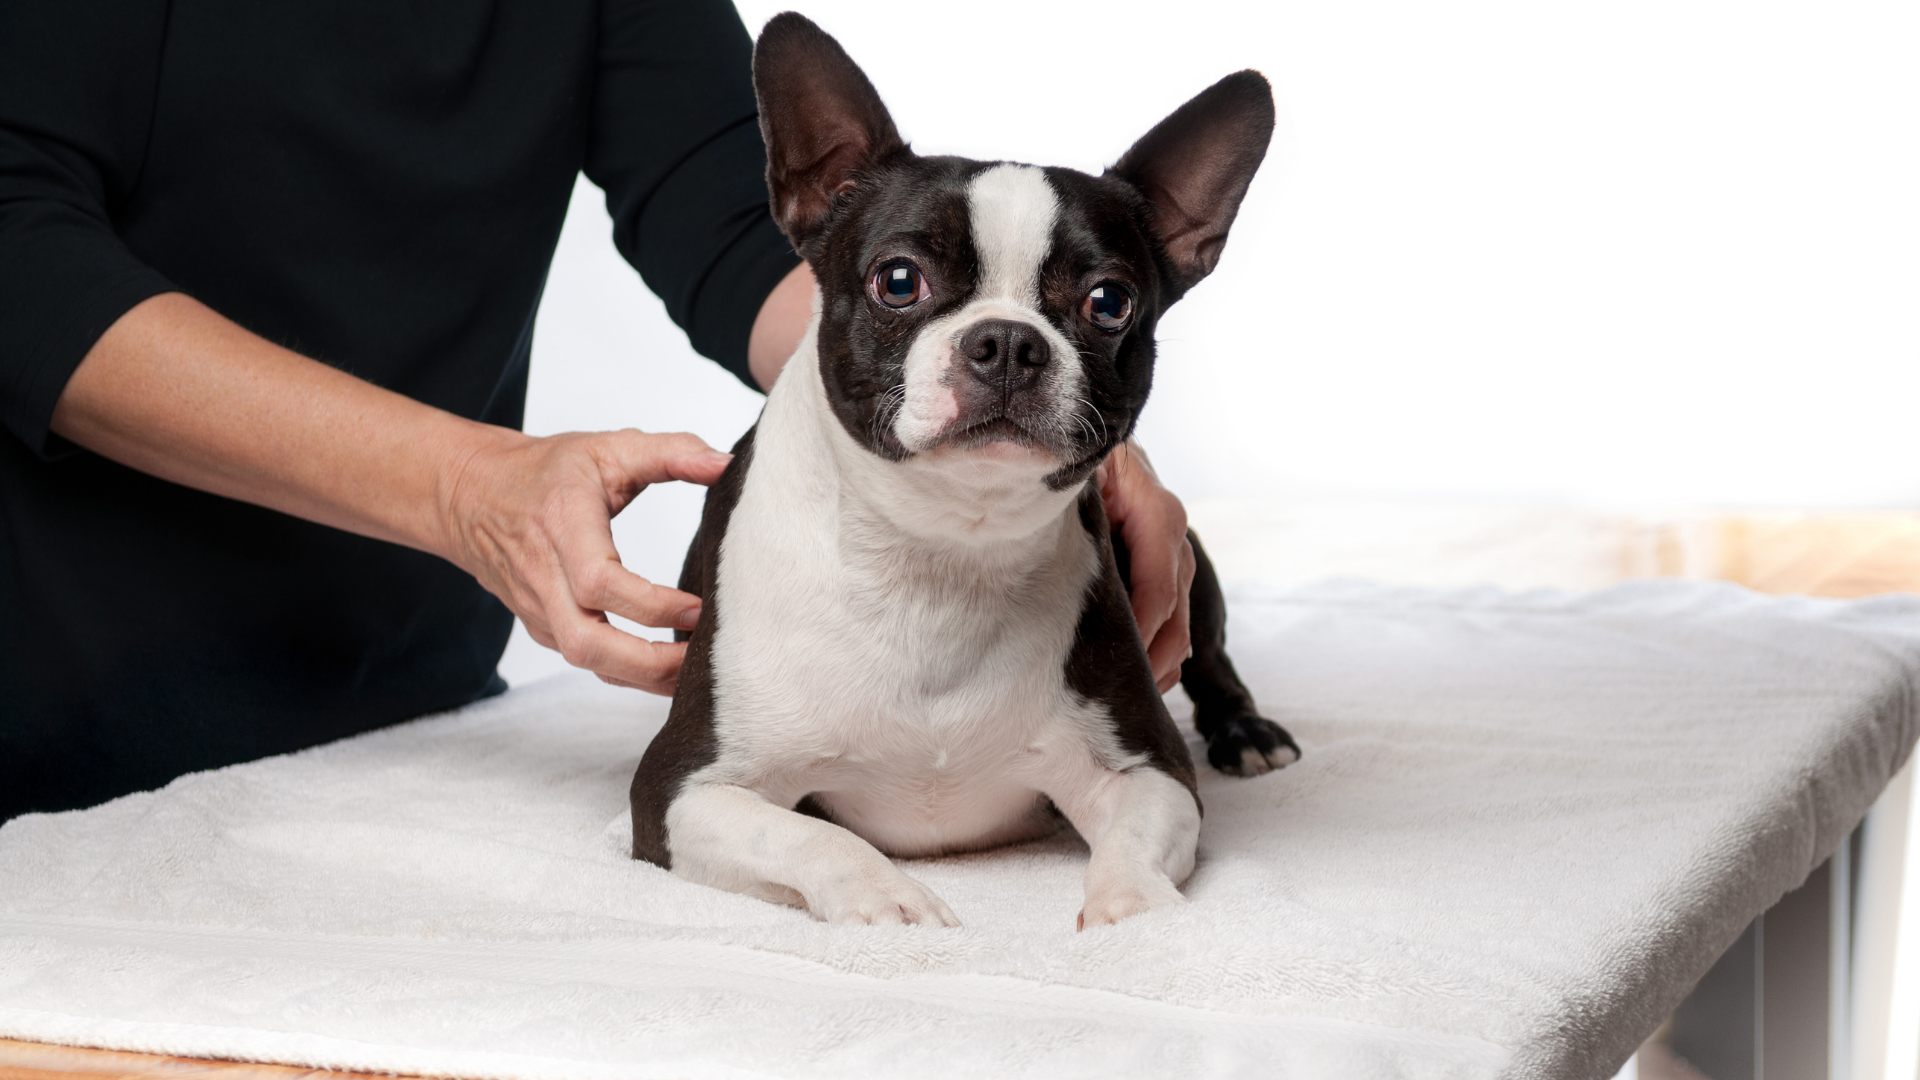 Dog Massage Therapy: The Benefits & Tips